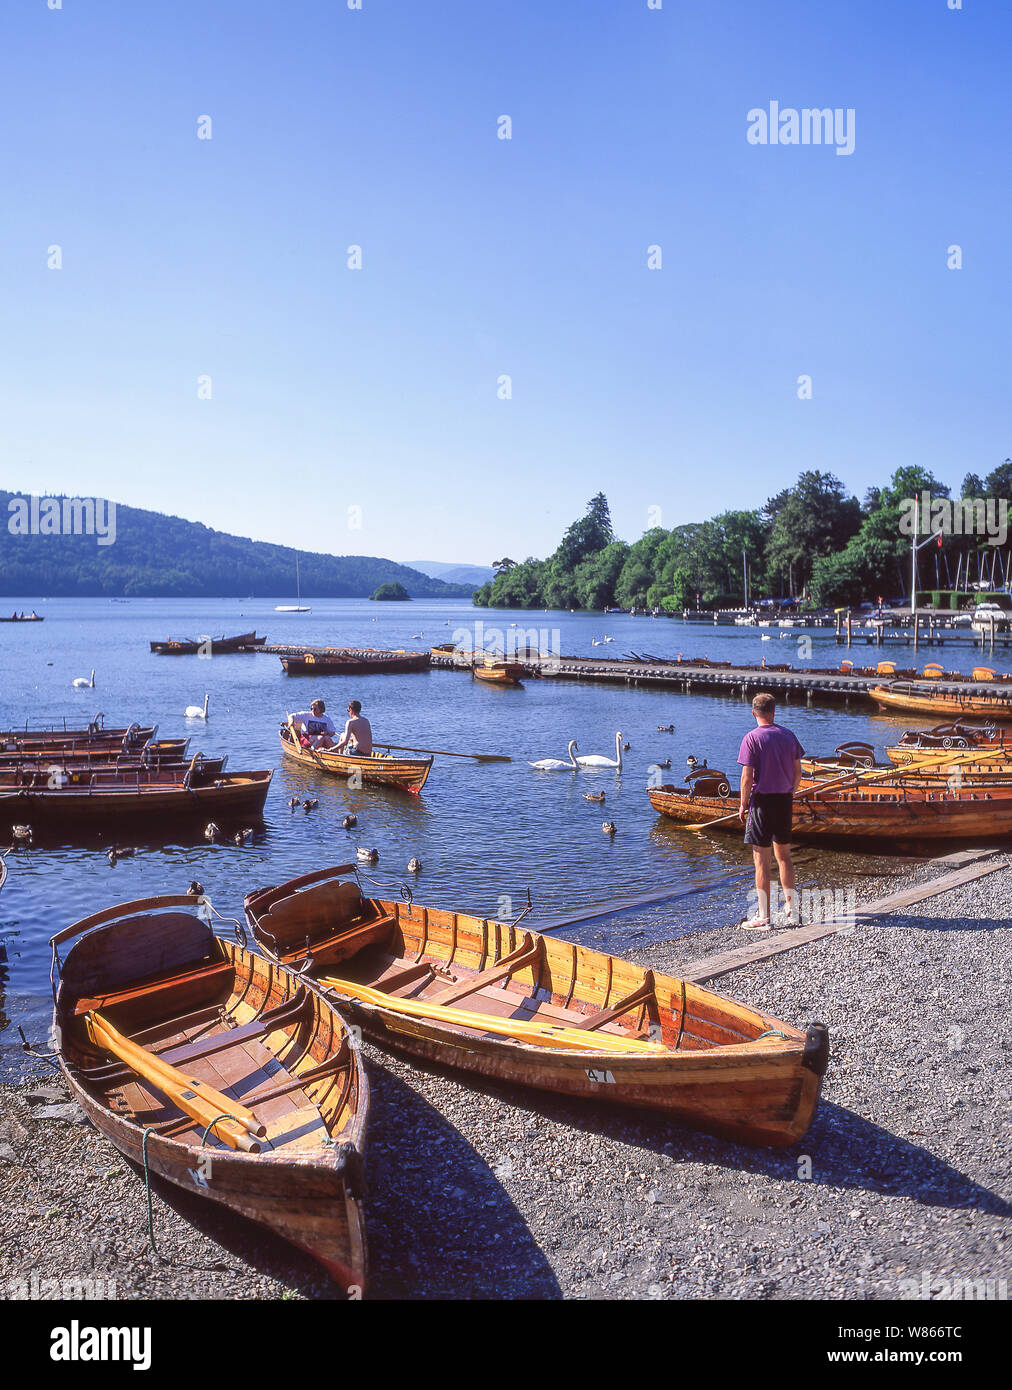 Rowing boats on Lake Windermere, Bowness-on-Windermere, Lake District National Park, Cumbria, England, United Kingdom Stock Photo